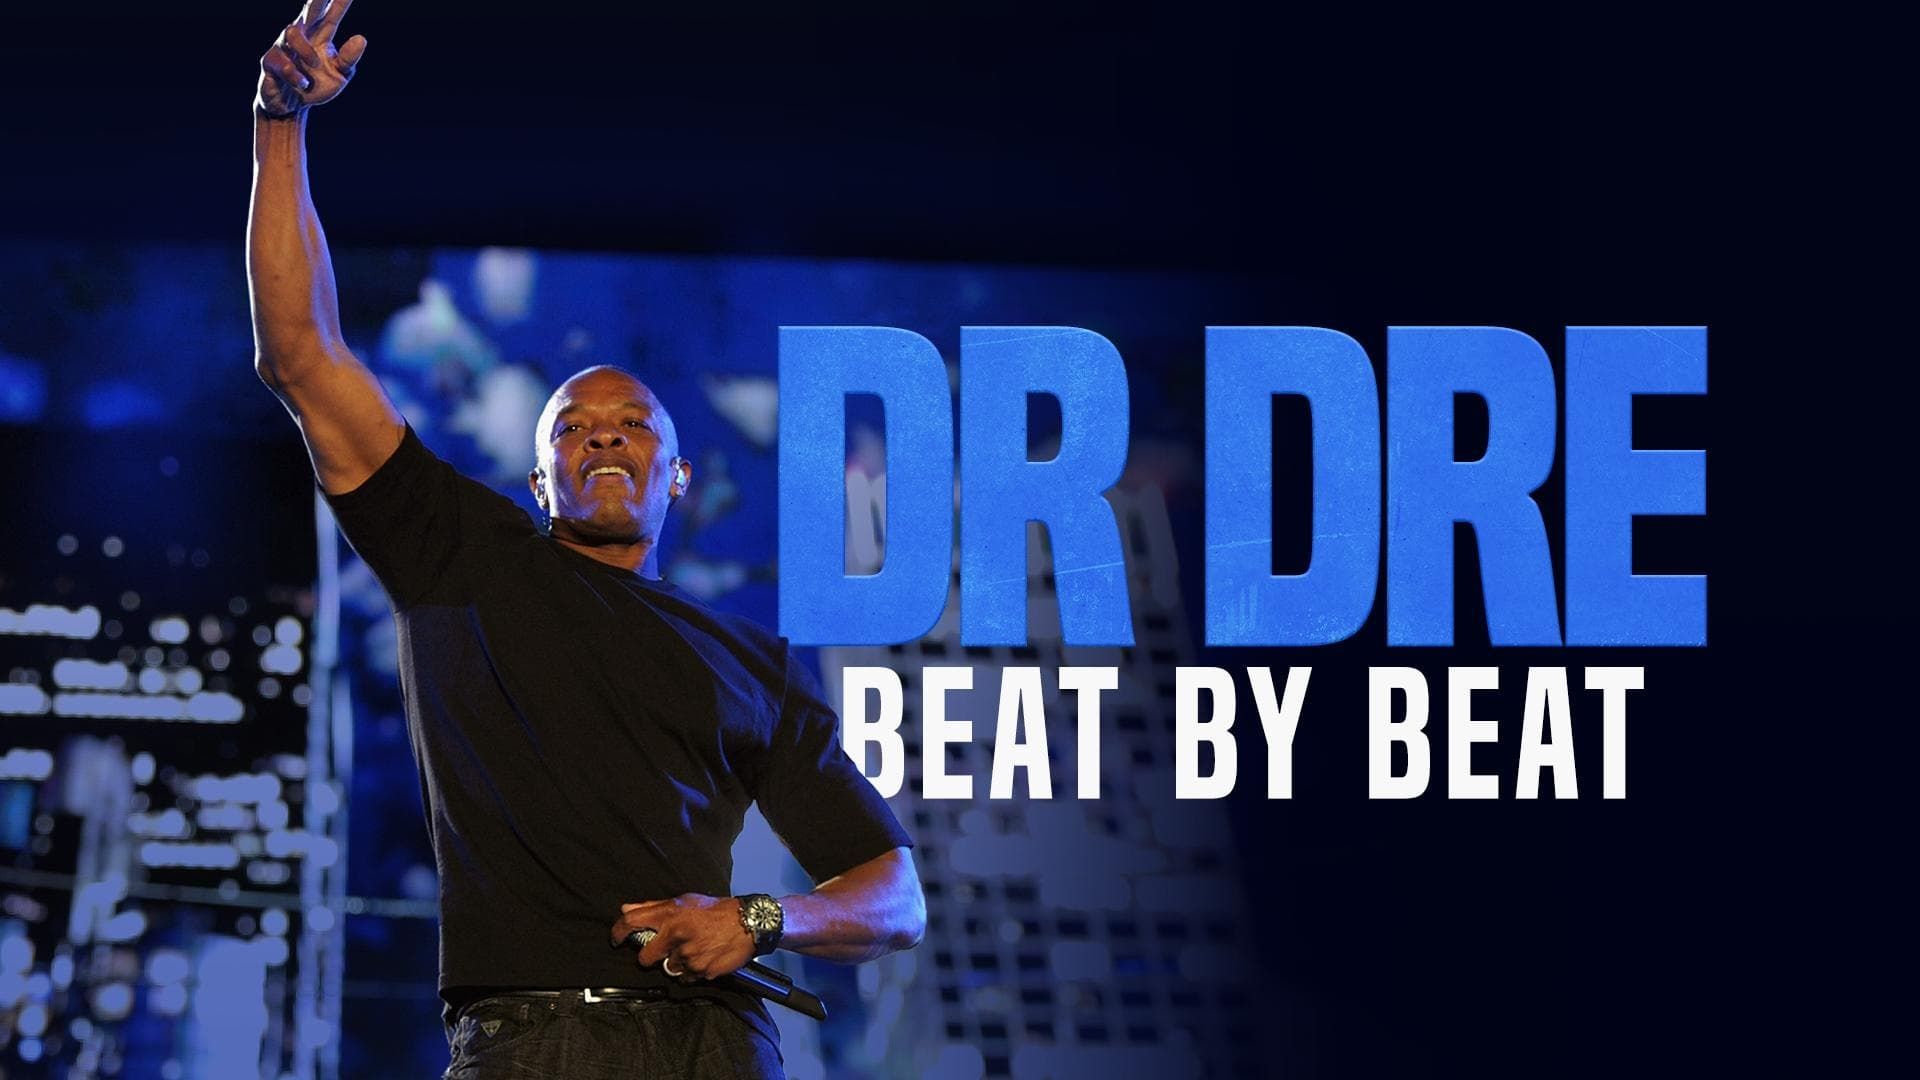 Dr. Dre: Beat by Beat background